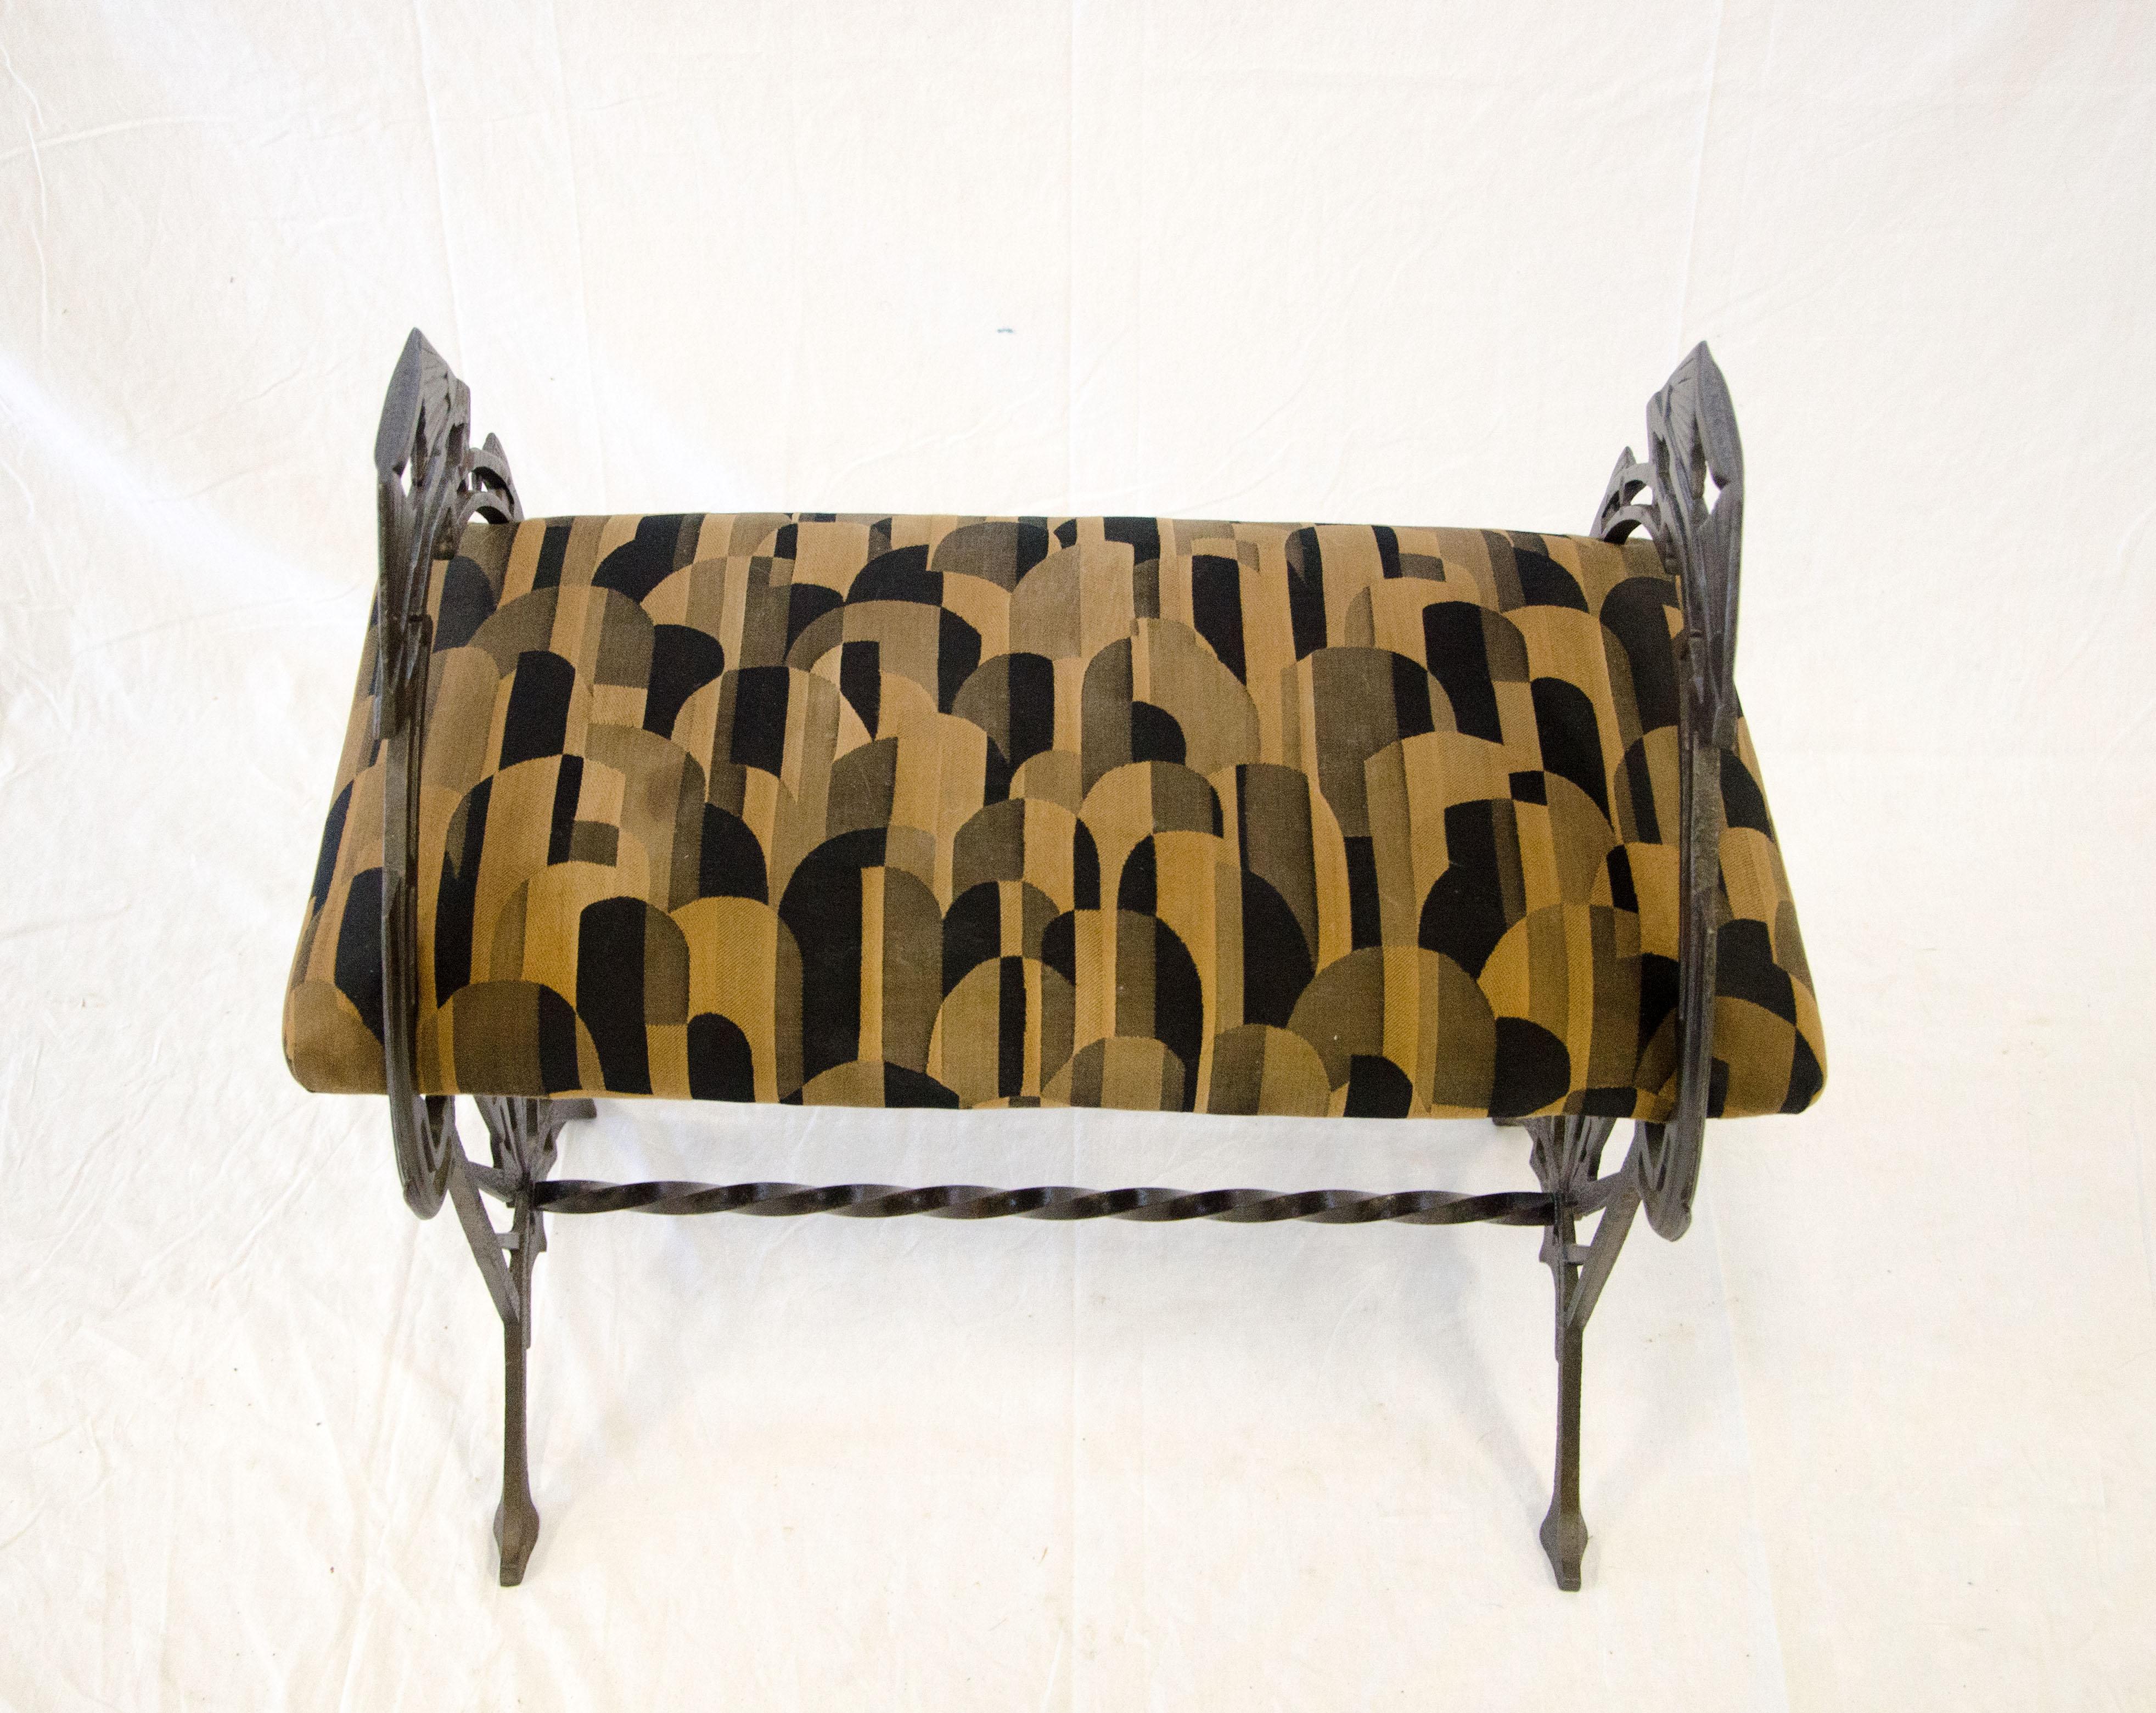 Small Art Deco Iron Bench In Good Condition For Sale In Crockett, CA